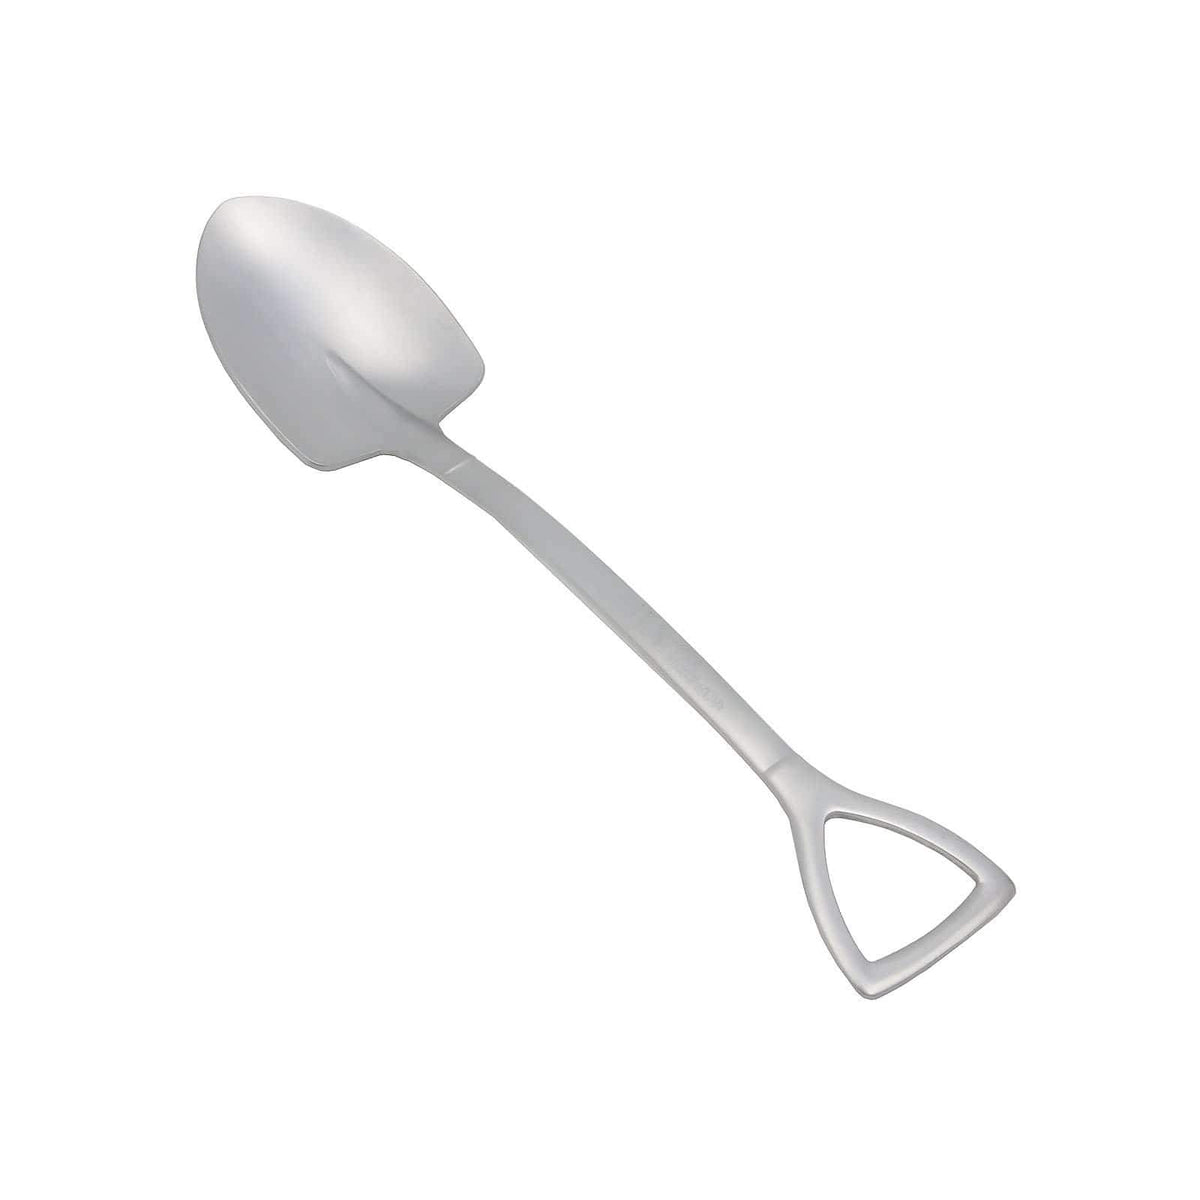 Takeda Stainless Steel Mat surface Large Shovel Shaped Spoon Spoon